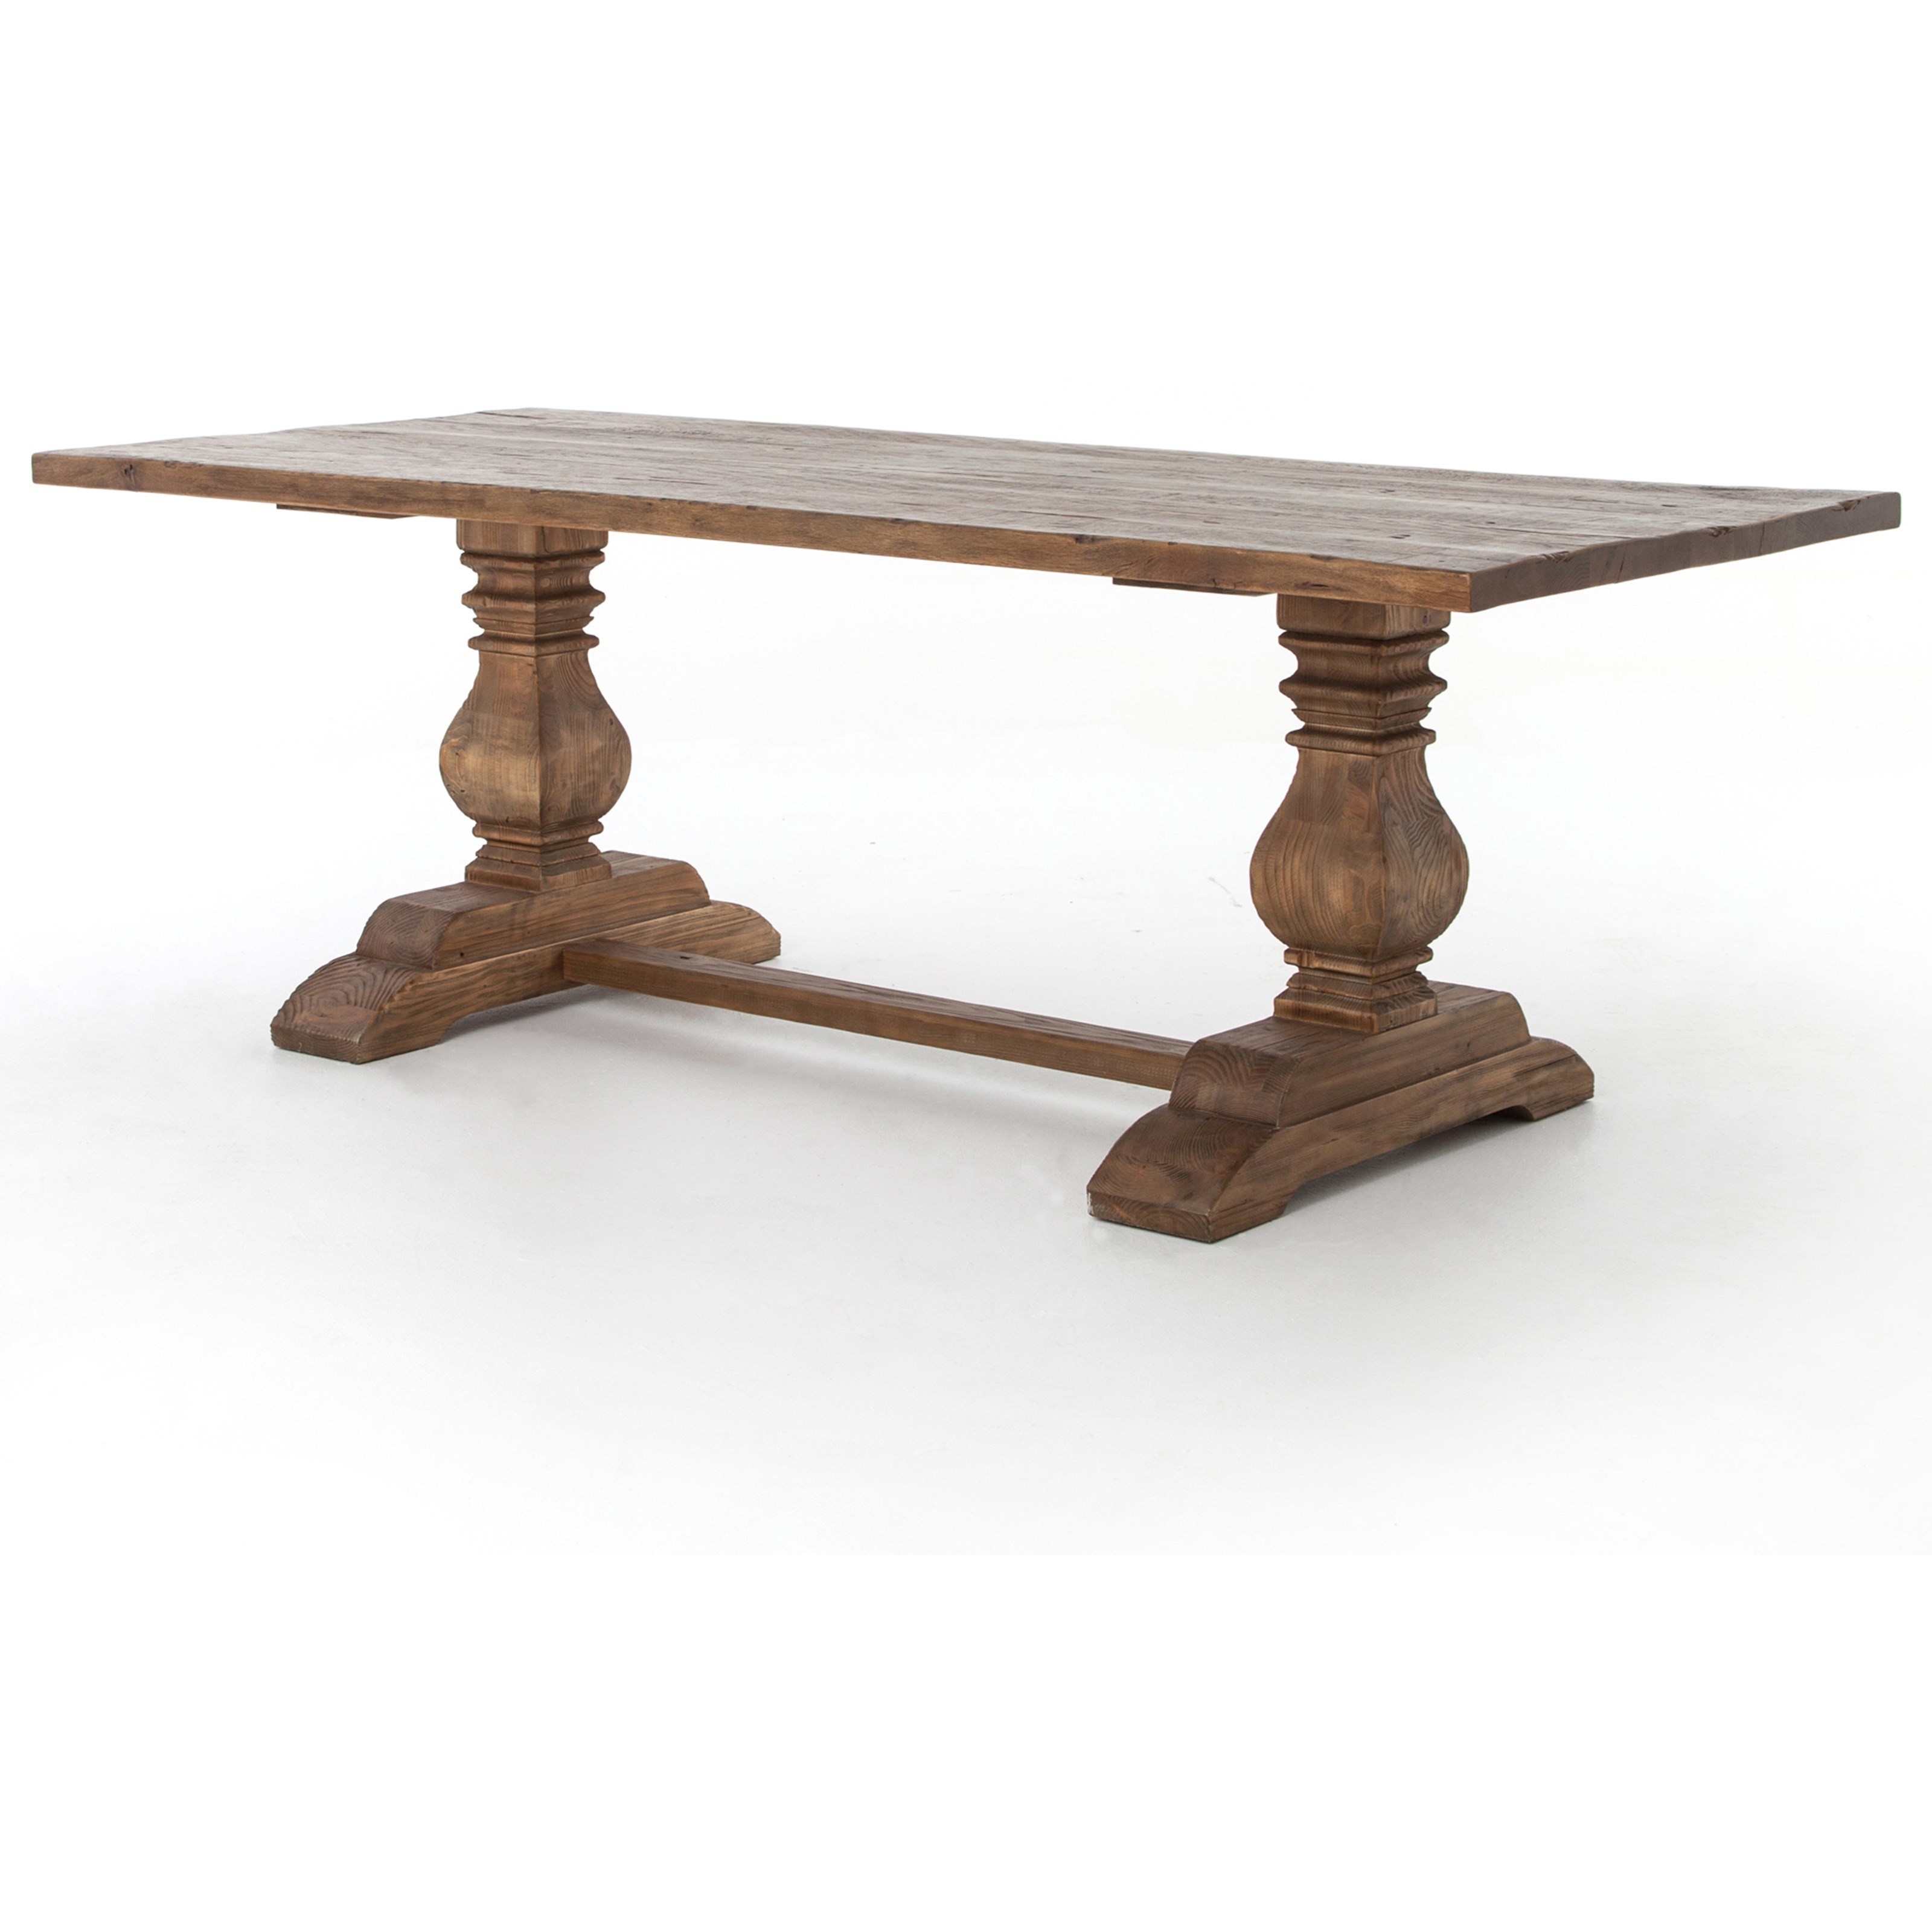 Rectangular Durham Dining Table with Double Sculptured Bases